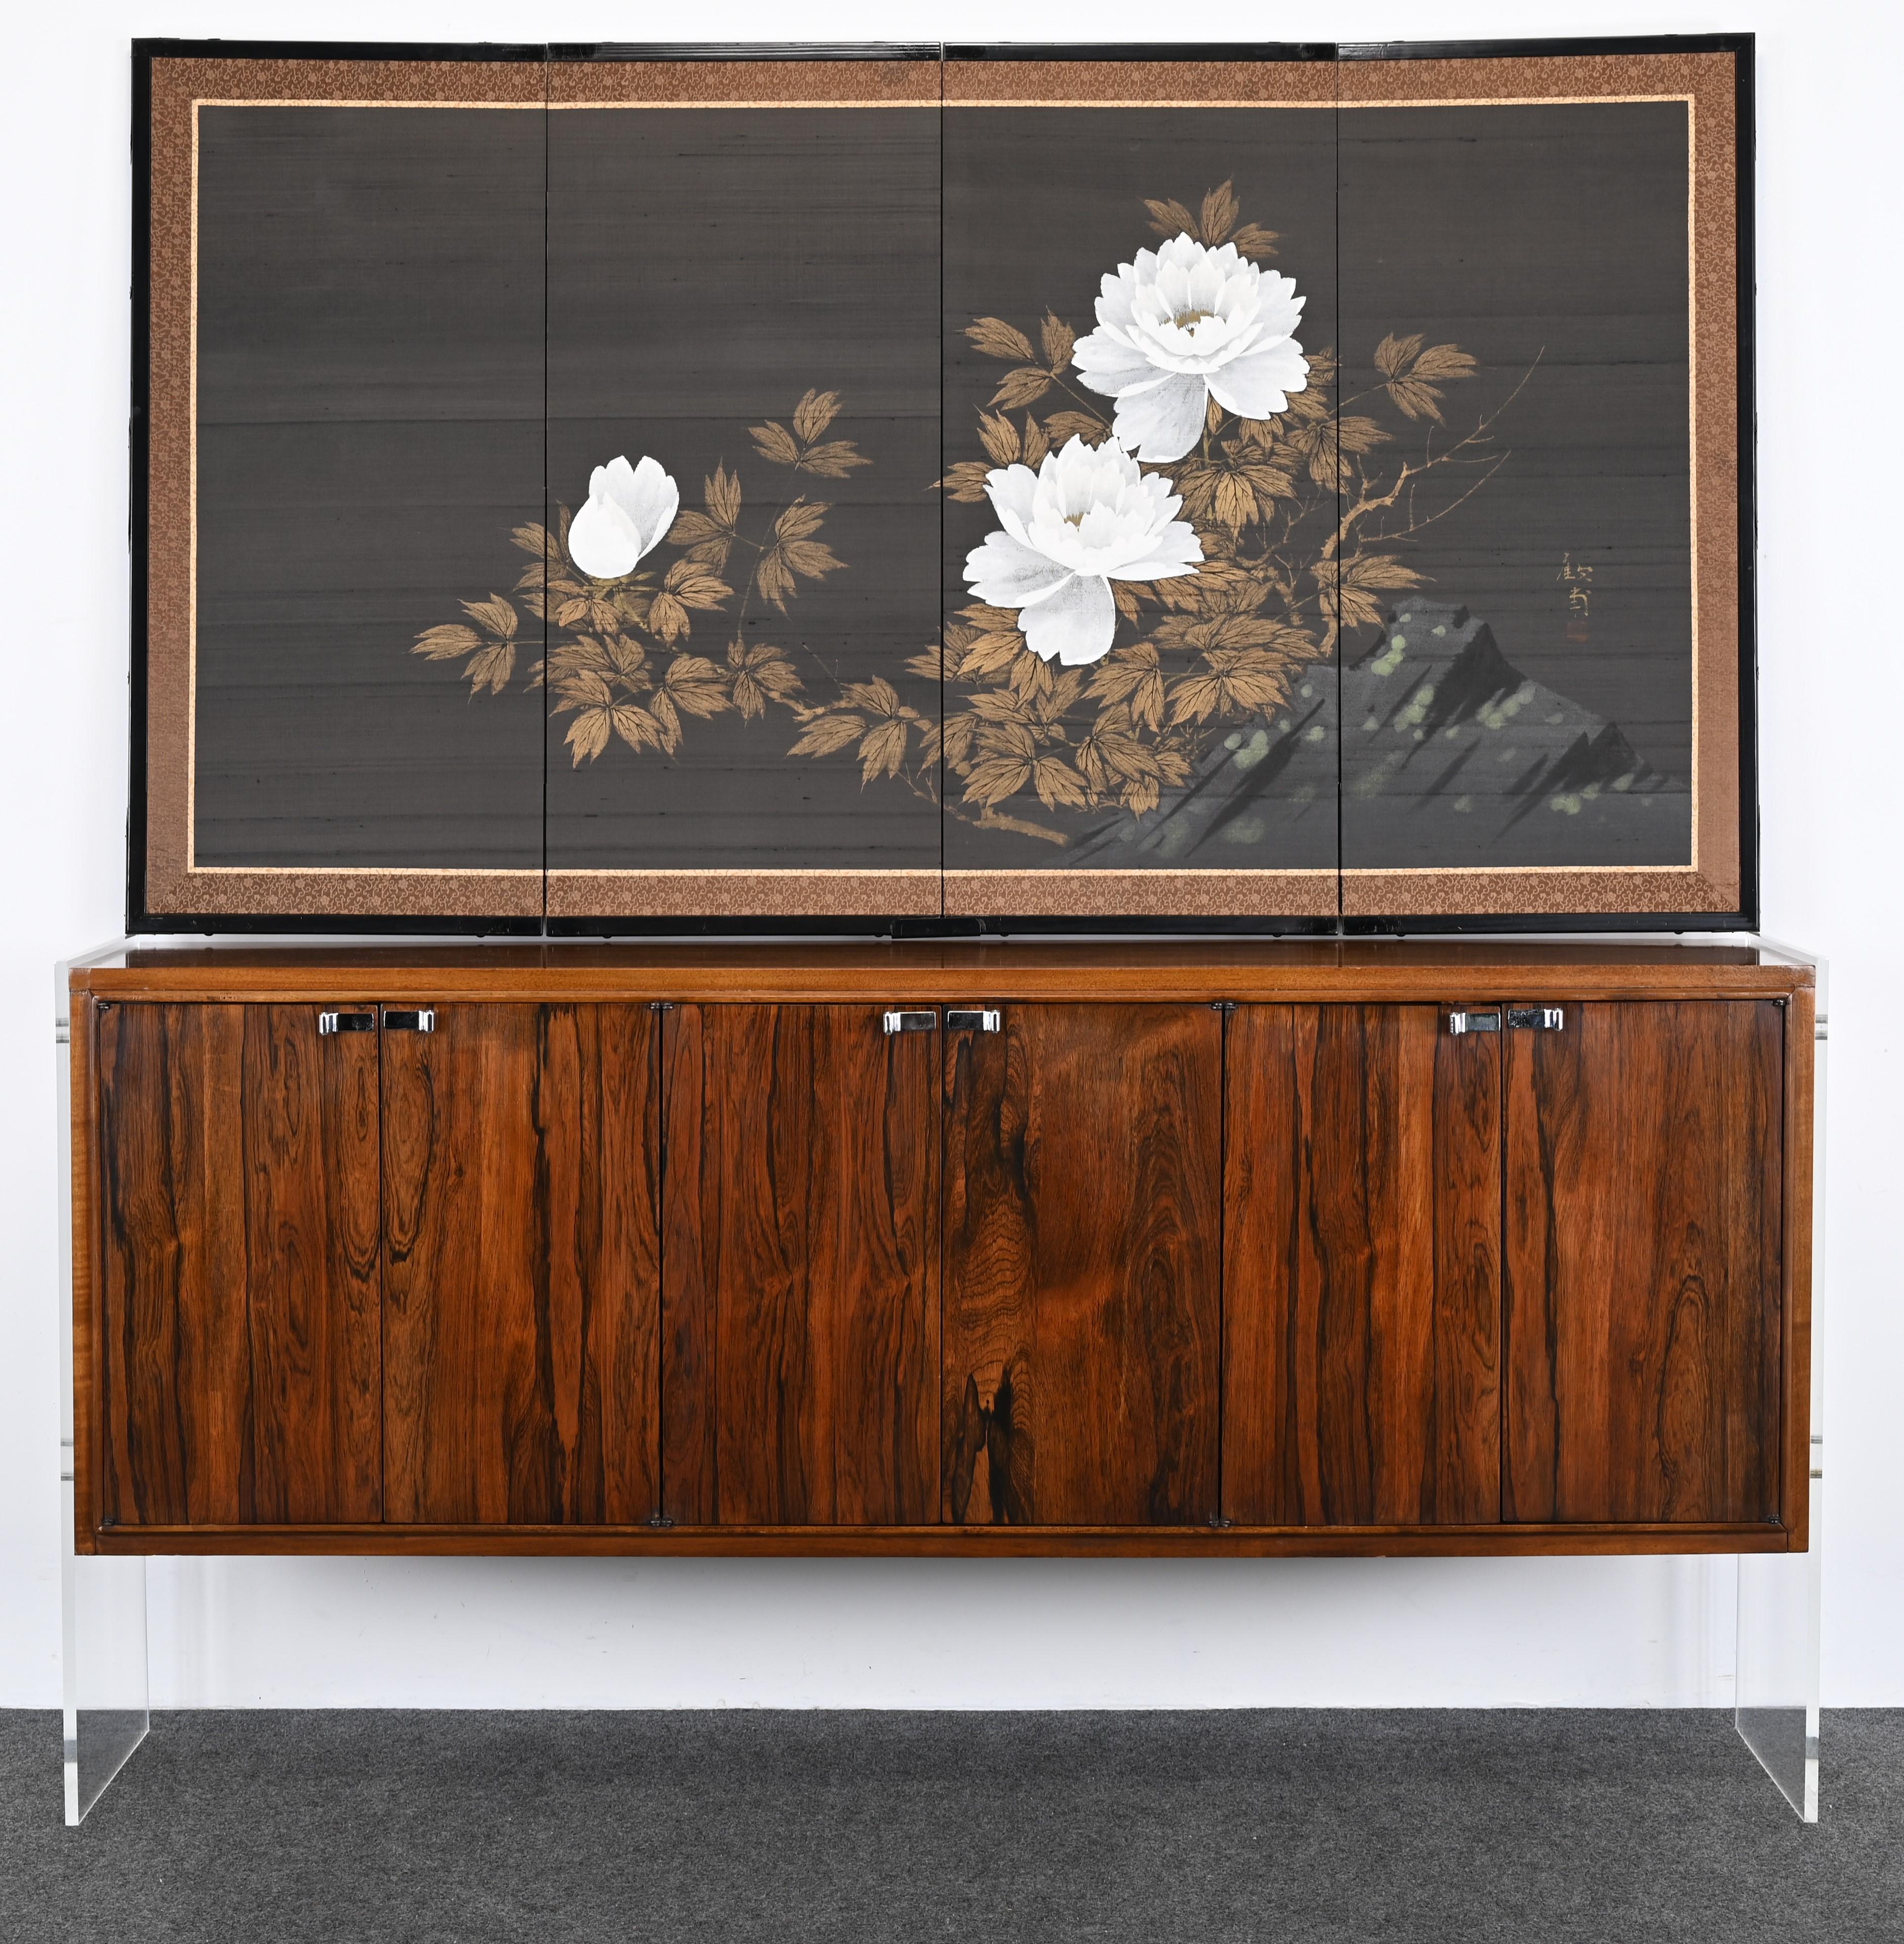 A beautiful Asian 4-panel screen with white lotus flowers, gold decoration, and mountains on silk. Has signature but not able to decipher artist or origin. Most likely Asian, Chinese, or Japanese. Appears to date from the mid-20th Century. Some